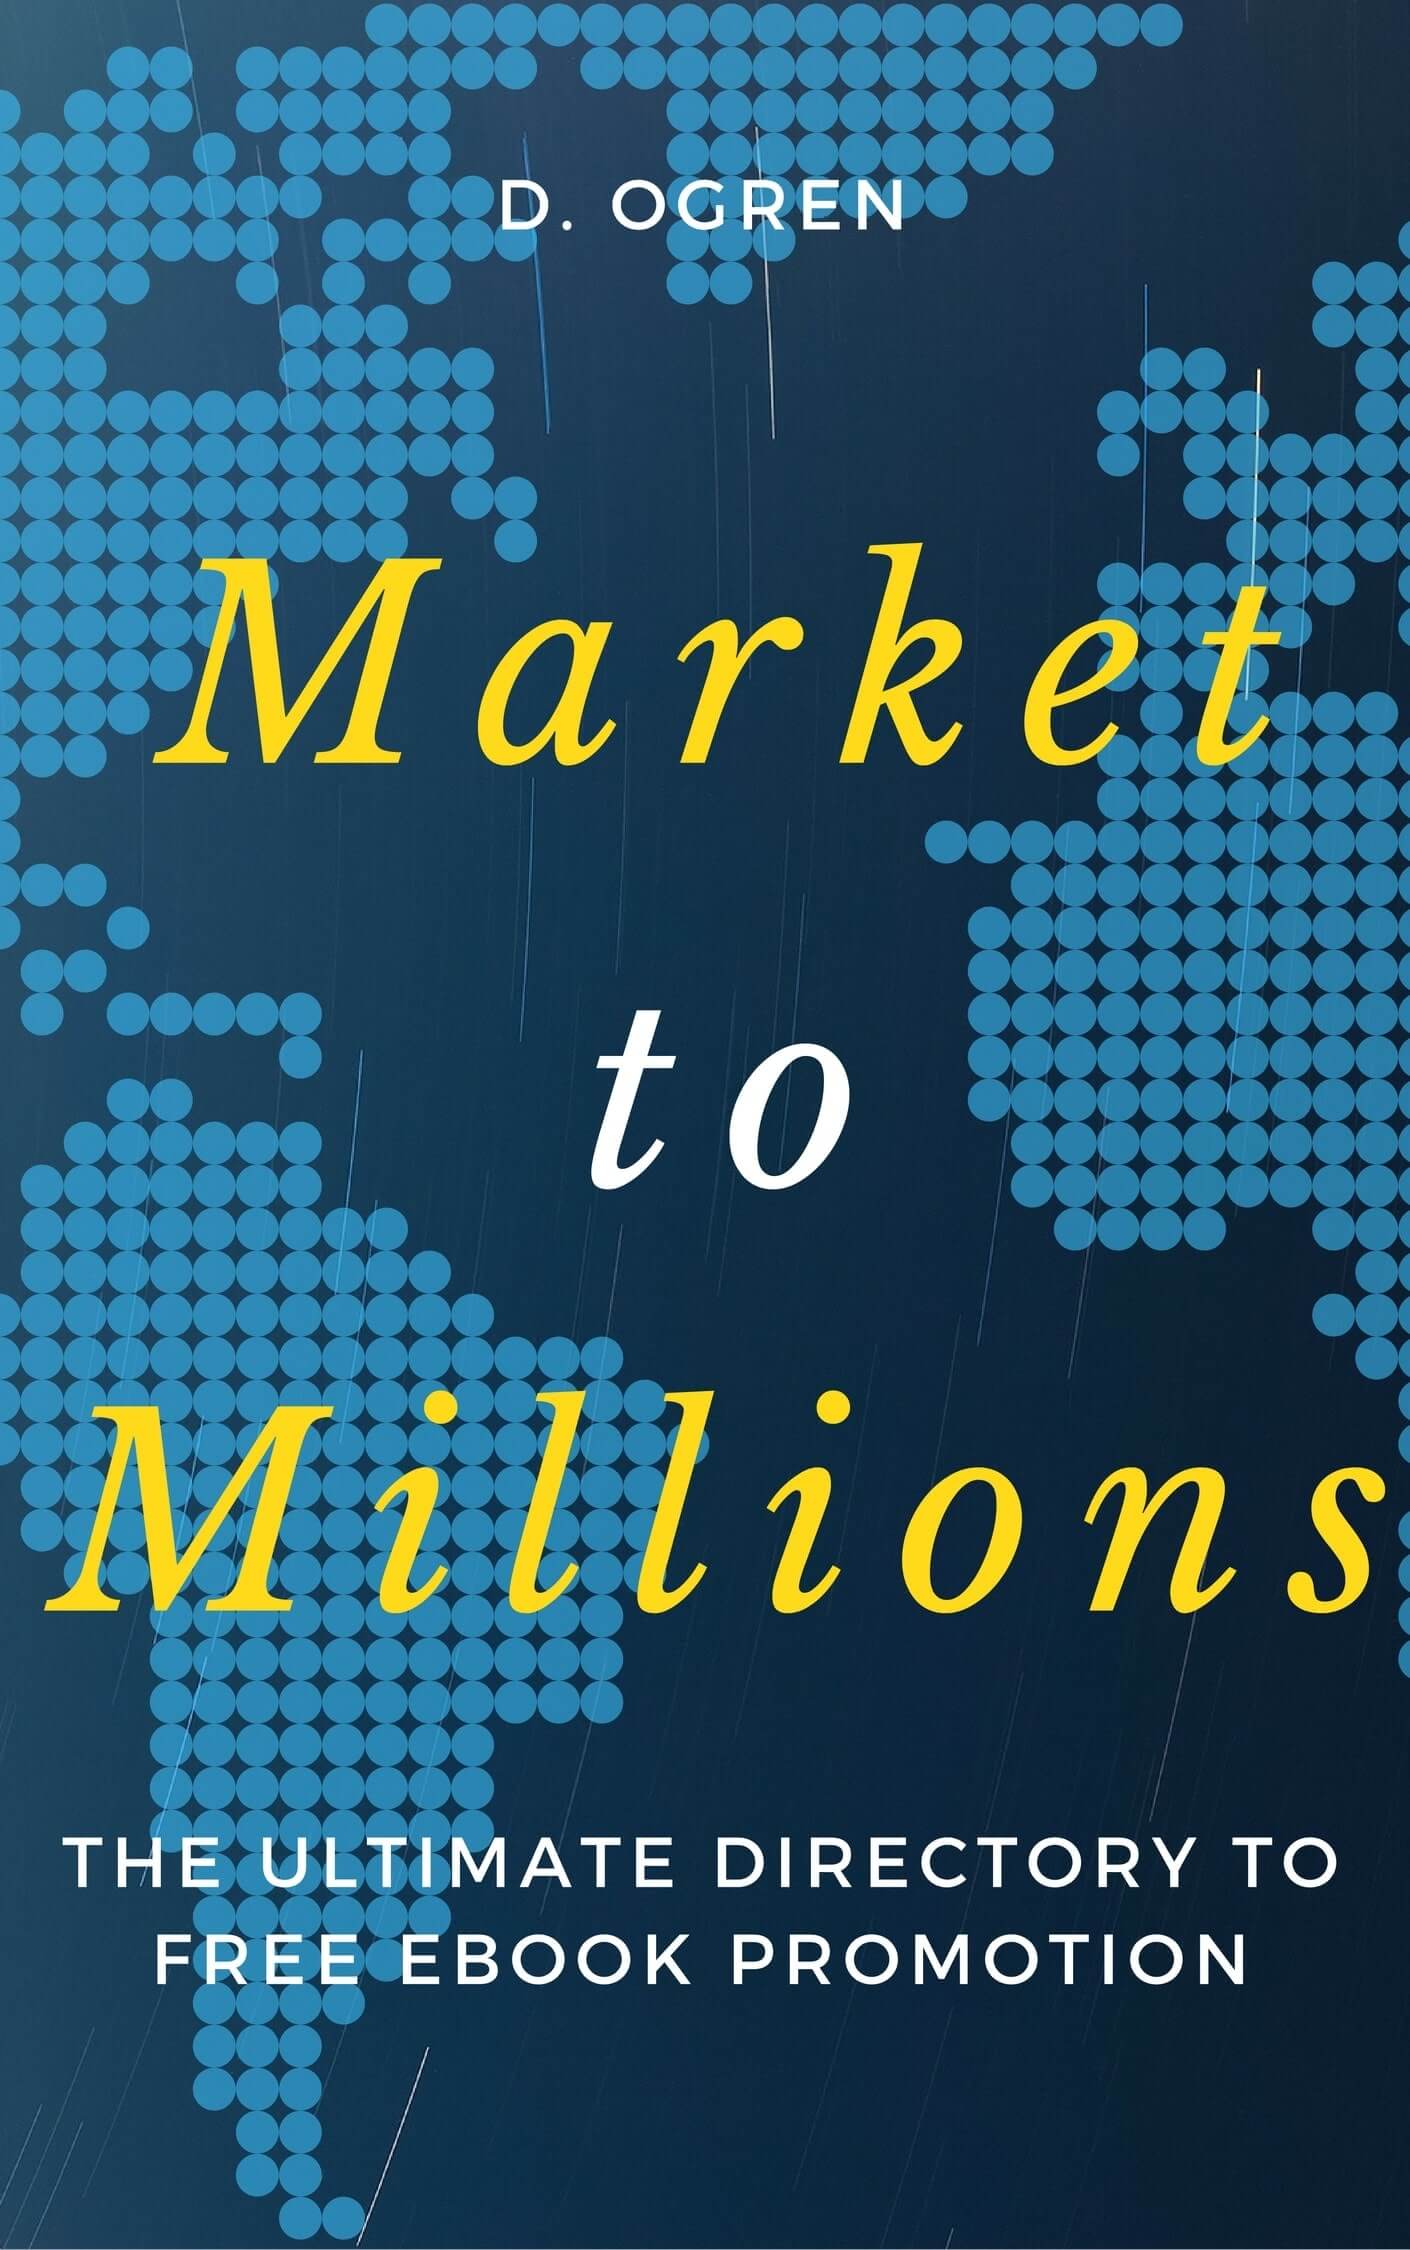 FREE: Market to Millions: The Ultimate Directory to FREE eBook Promotion by David A. Ogren